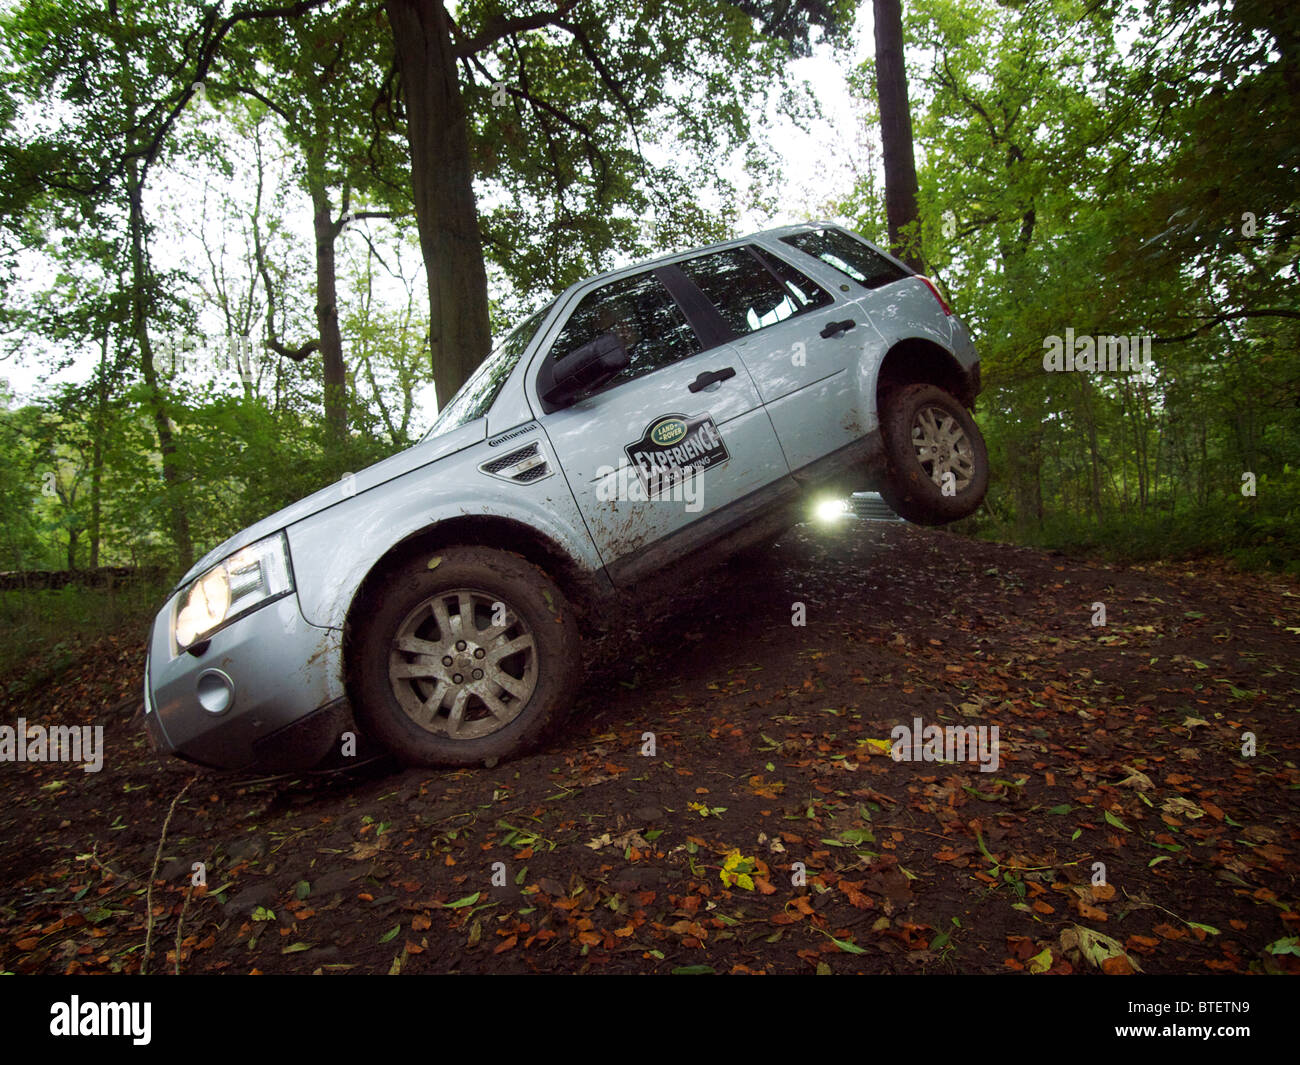 Landrover Freelander lifting a rear wheel while driving off road at Domaine d'Arthey, Belgium Stock Photo